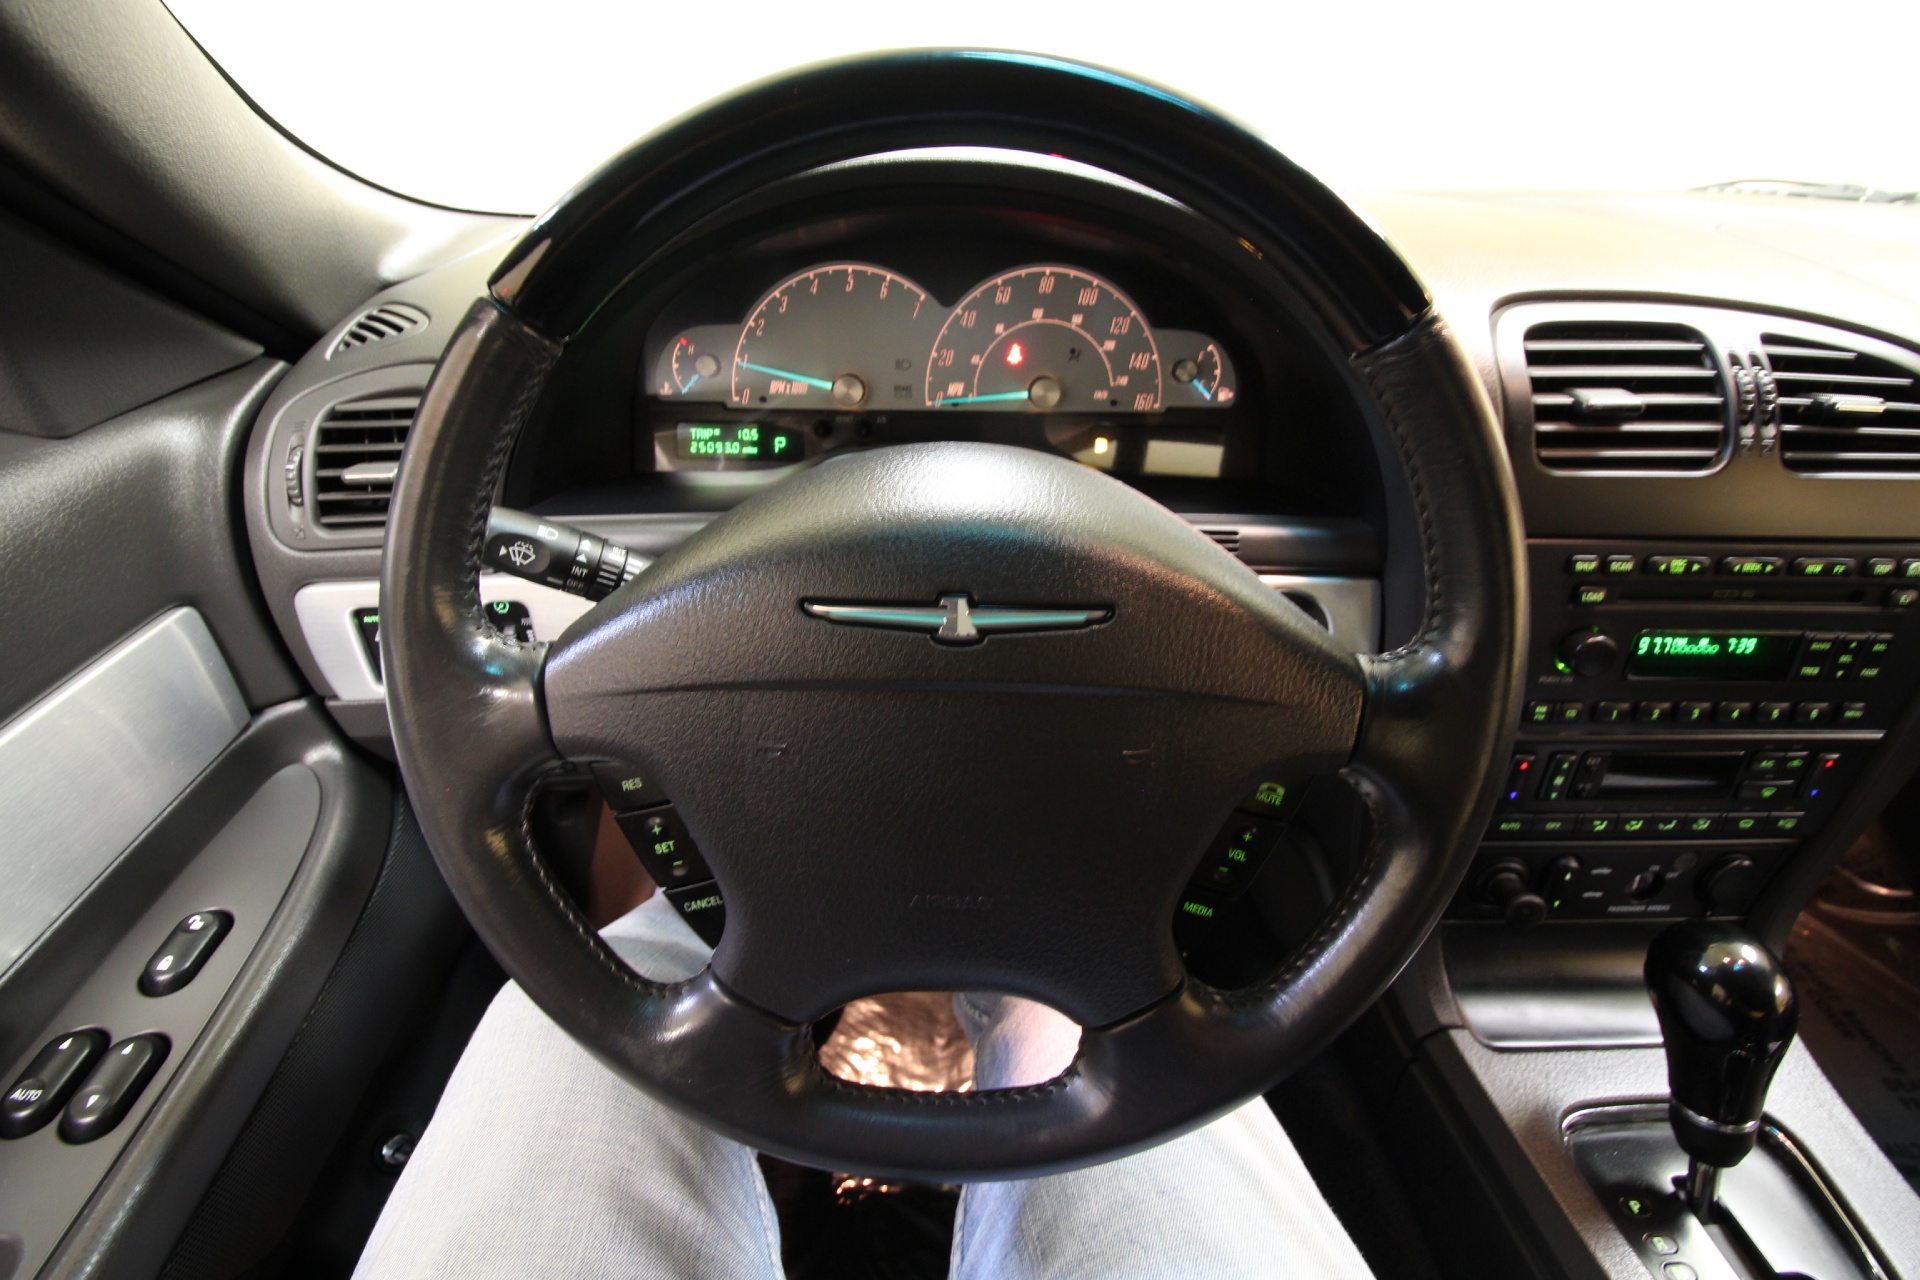 Used 2002 Teal Ford Thunderbird Deluxe SUPER CLEAN,SUPER LOW MILES | Albany, NY